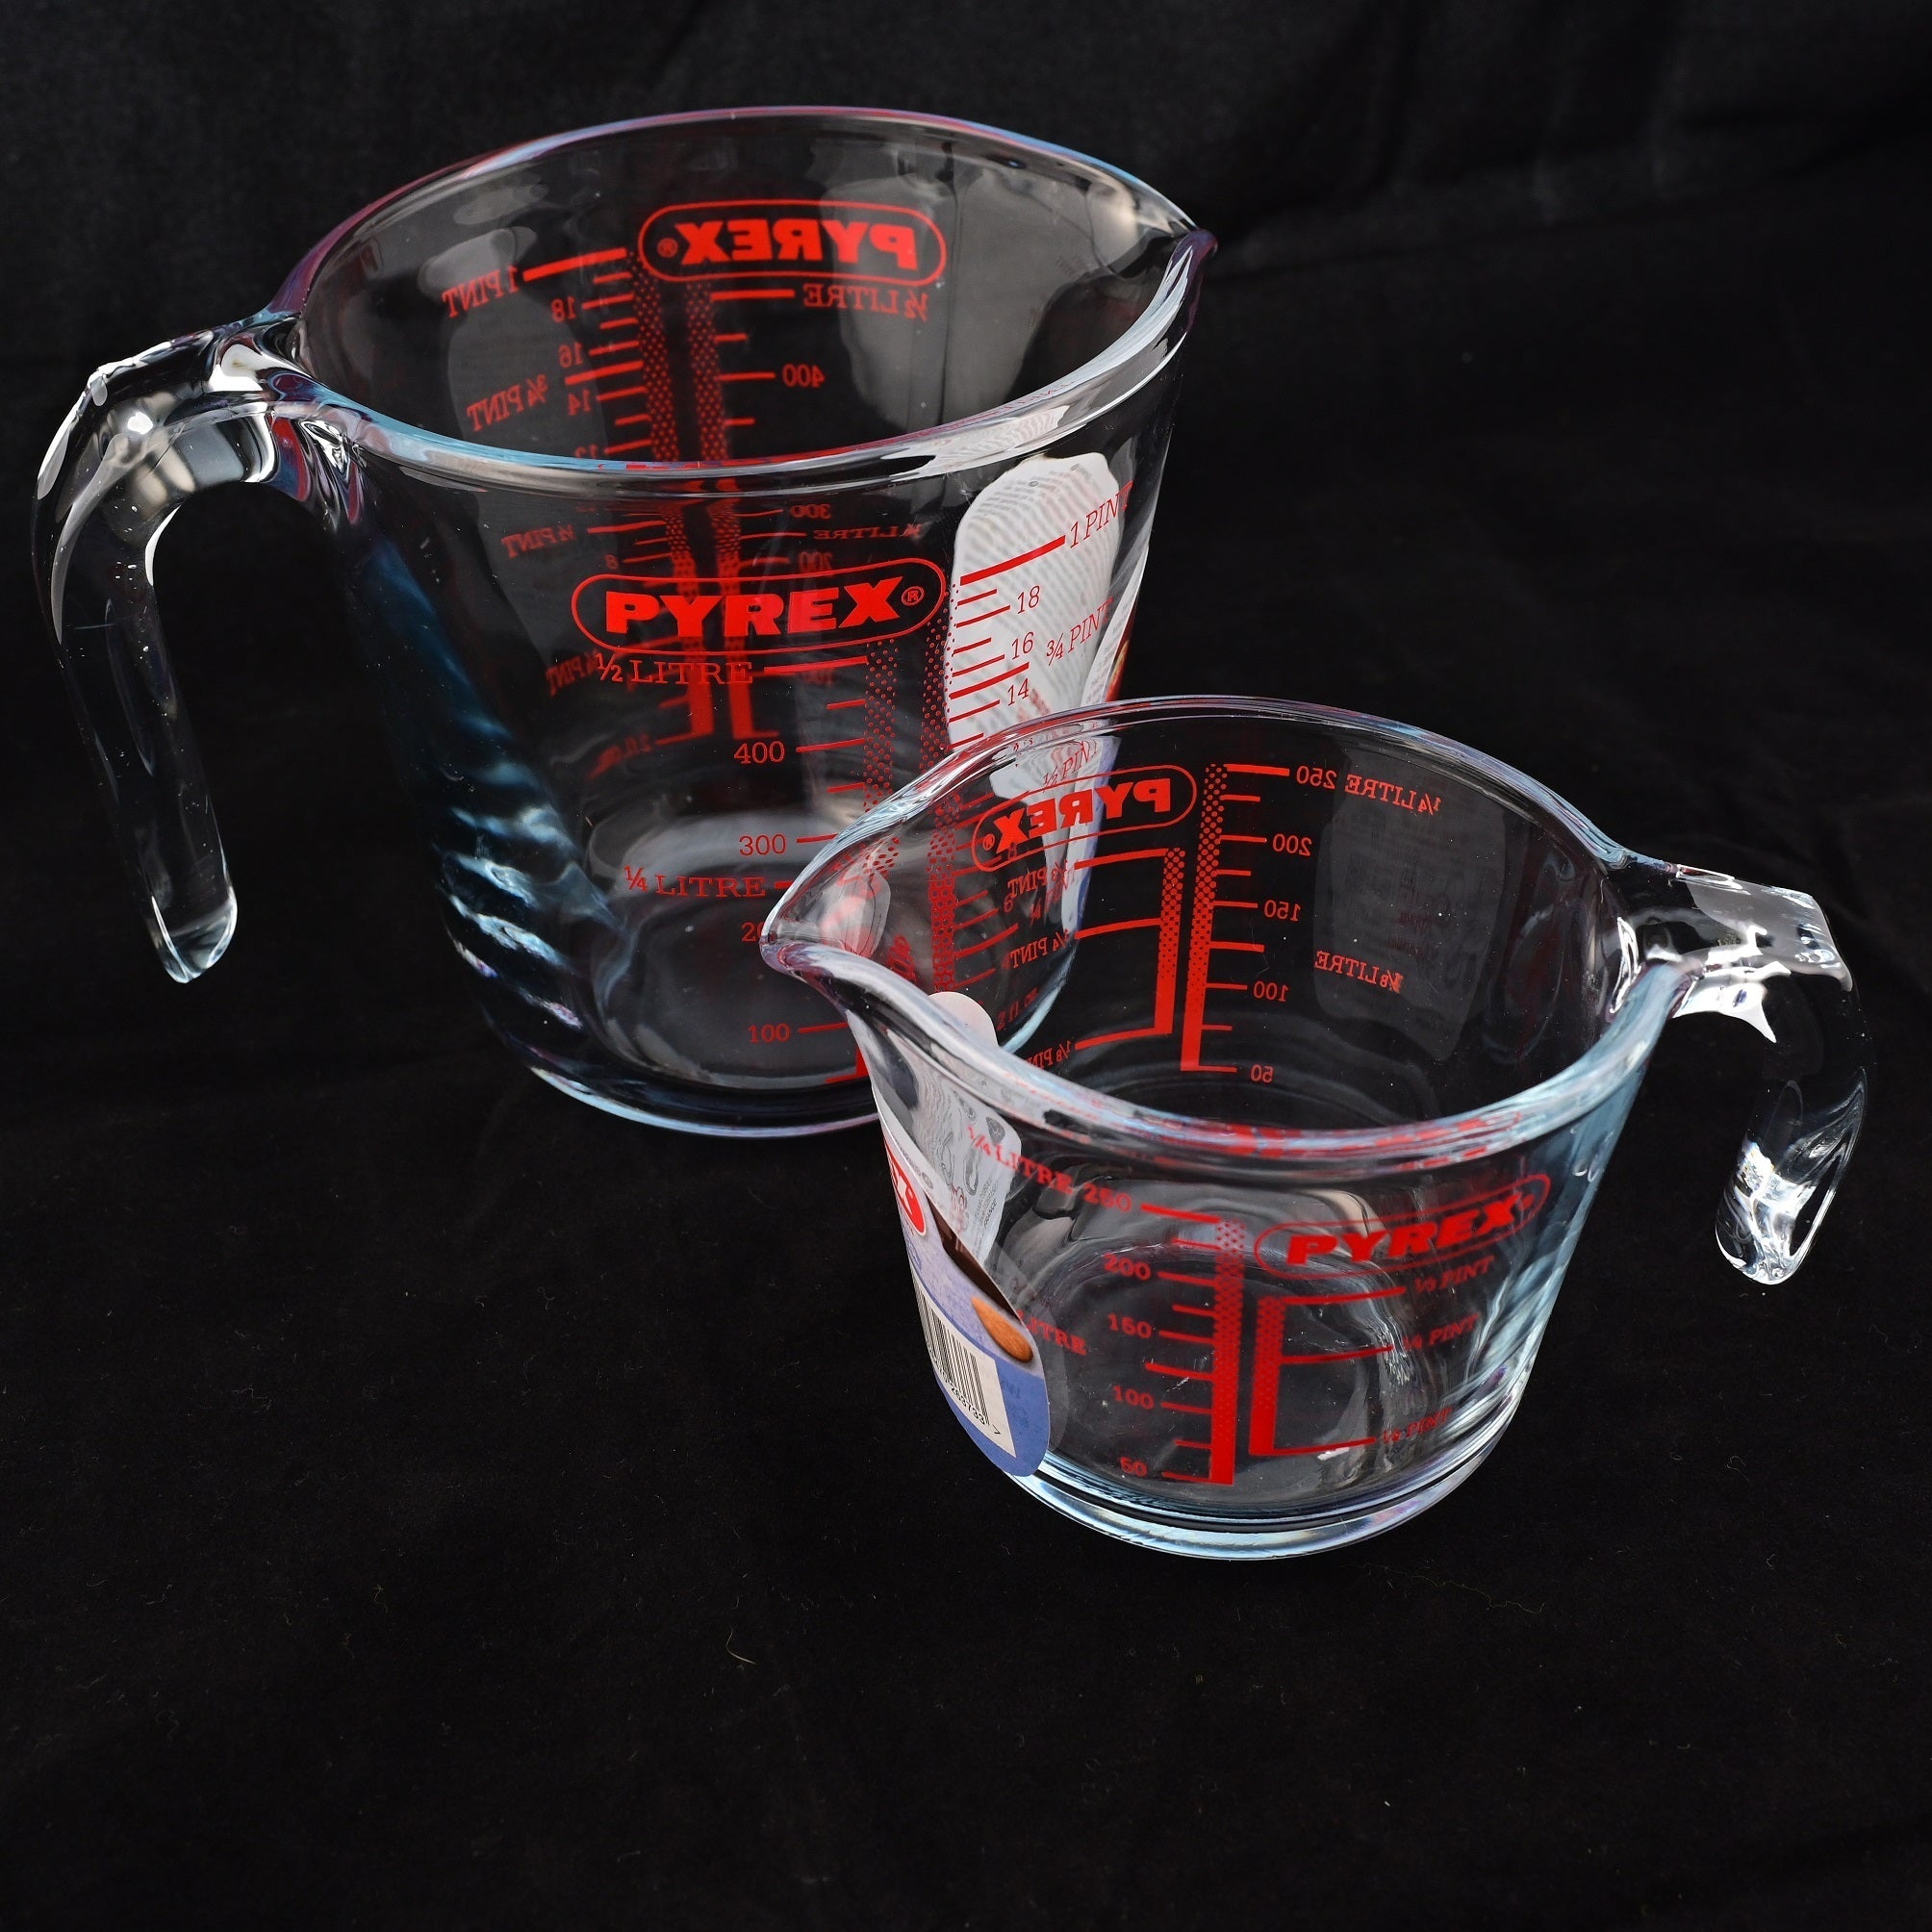 Measuring Cup, 1000 ml